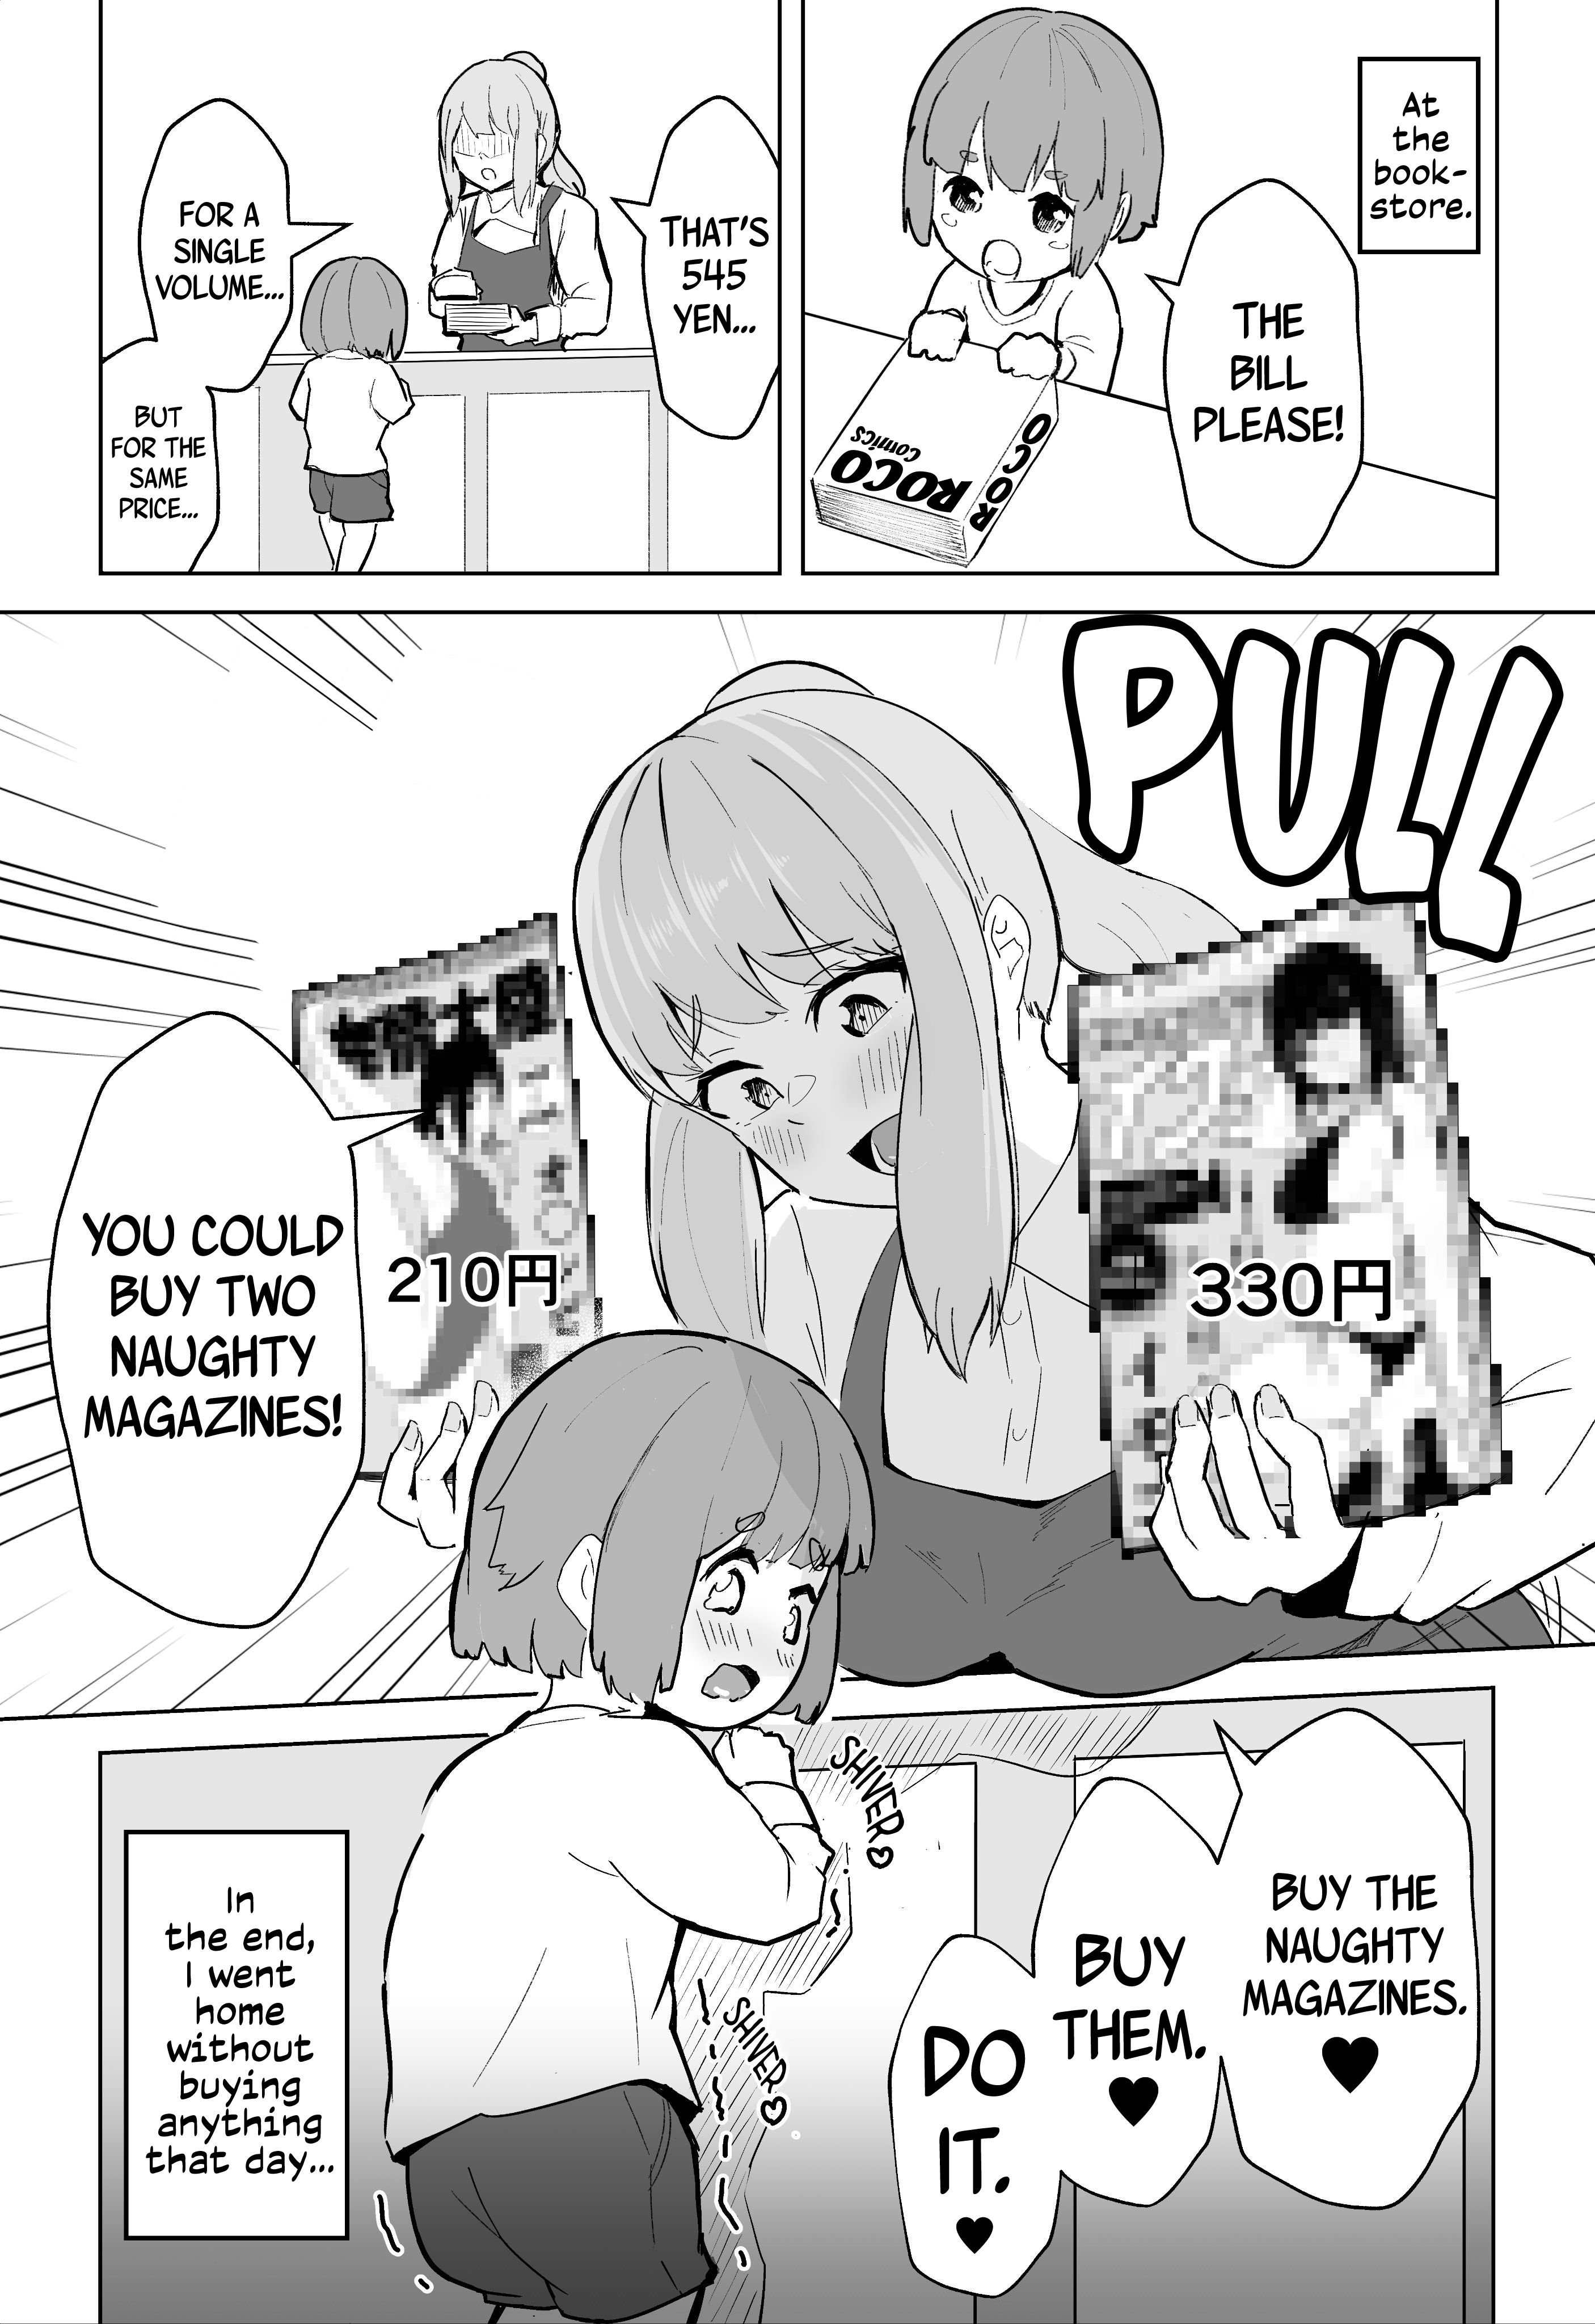 The Shota Who Wants To Buy A Naughty Magazine And The Onee-San Who Wants To Sell Him One - chapter 7 - #1